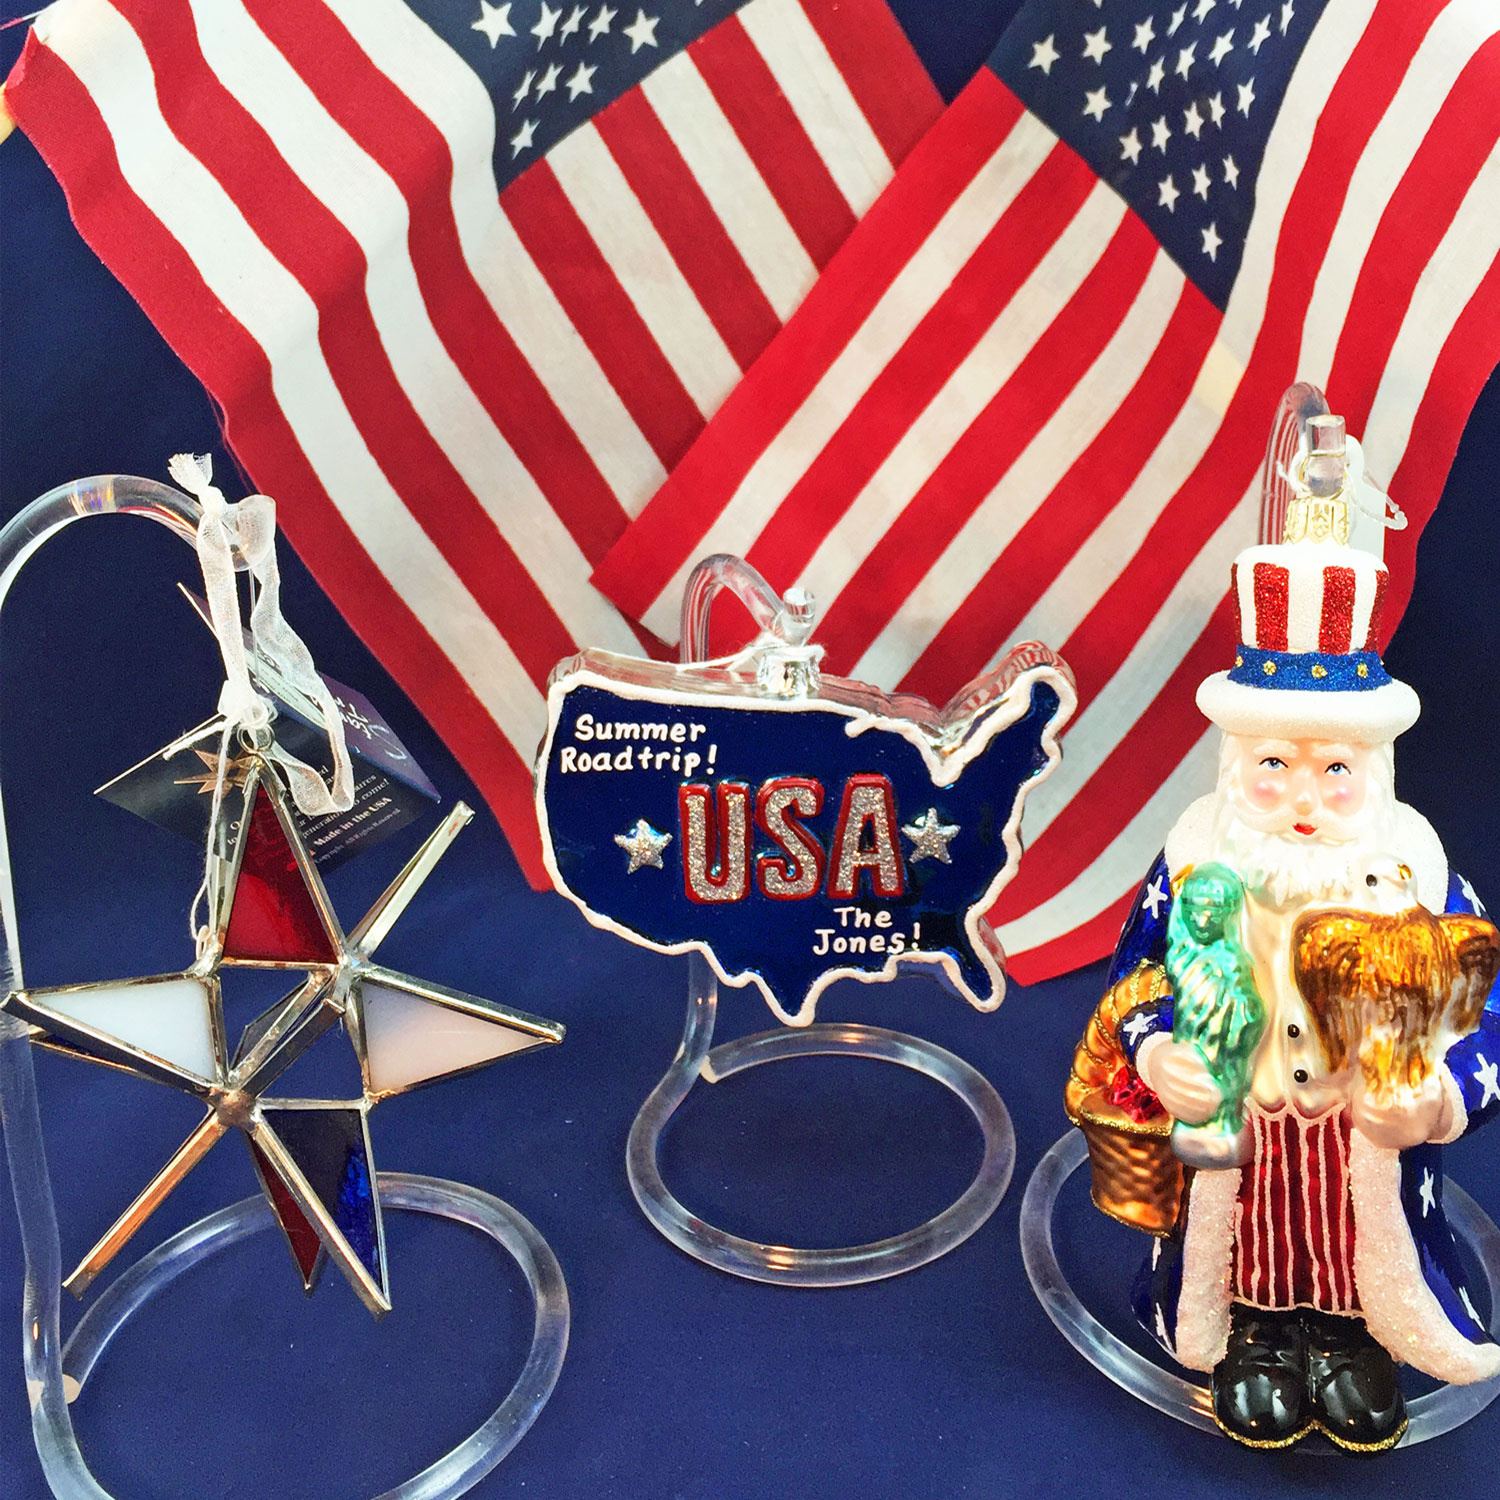 Patriotic ornaments including a glass star, USA country shape and Santa as Uncle Sam for Memorial Day | OrnamentShop.com